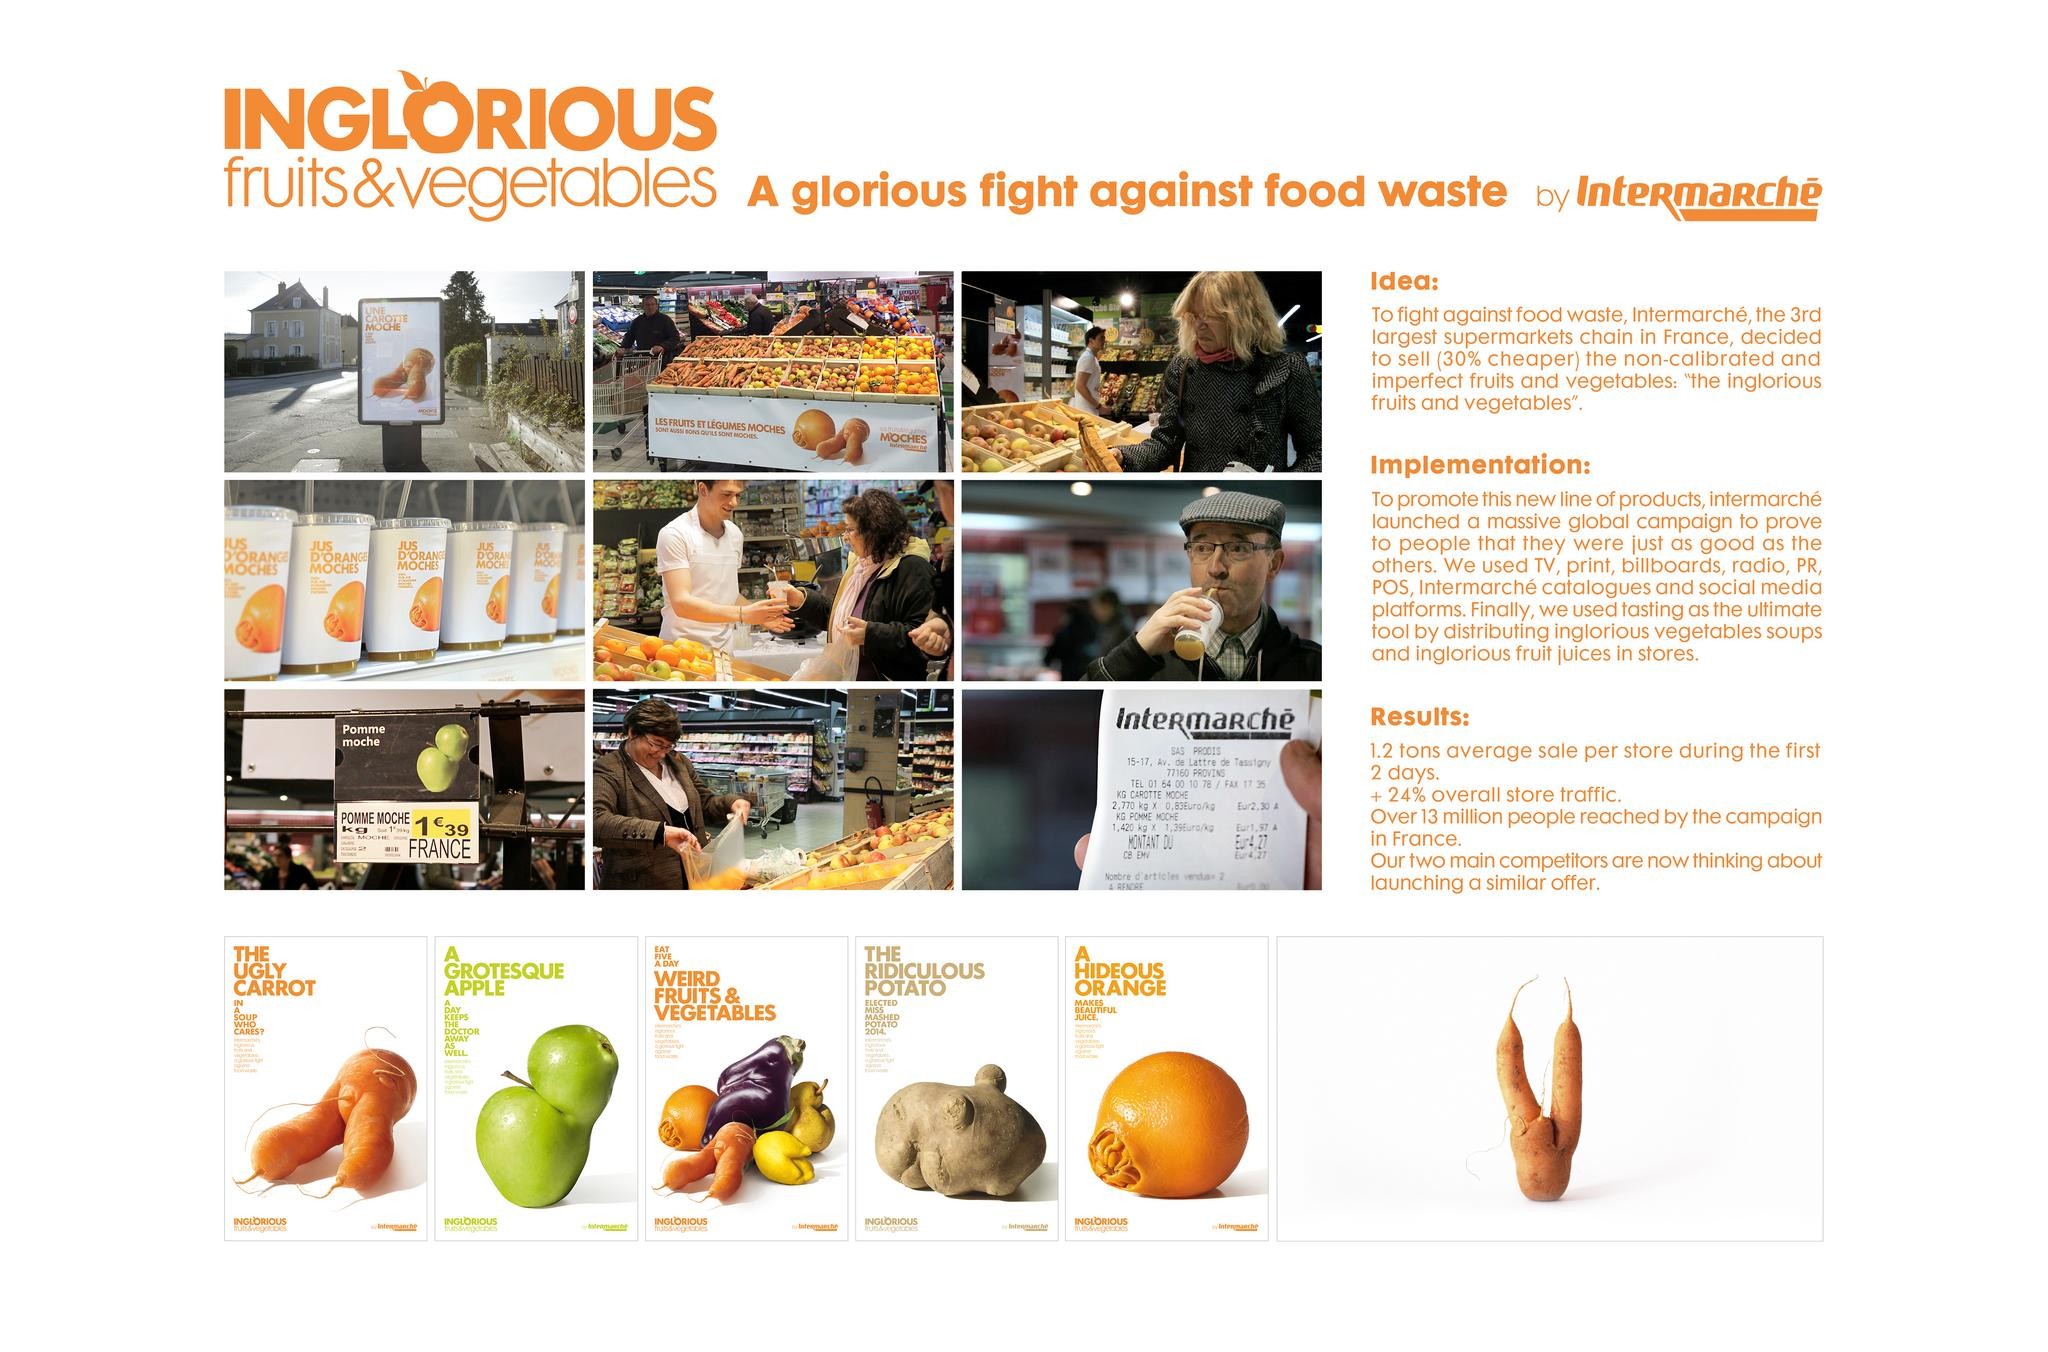 INGLORIOUS FRUITS AND VEGETABLES